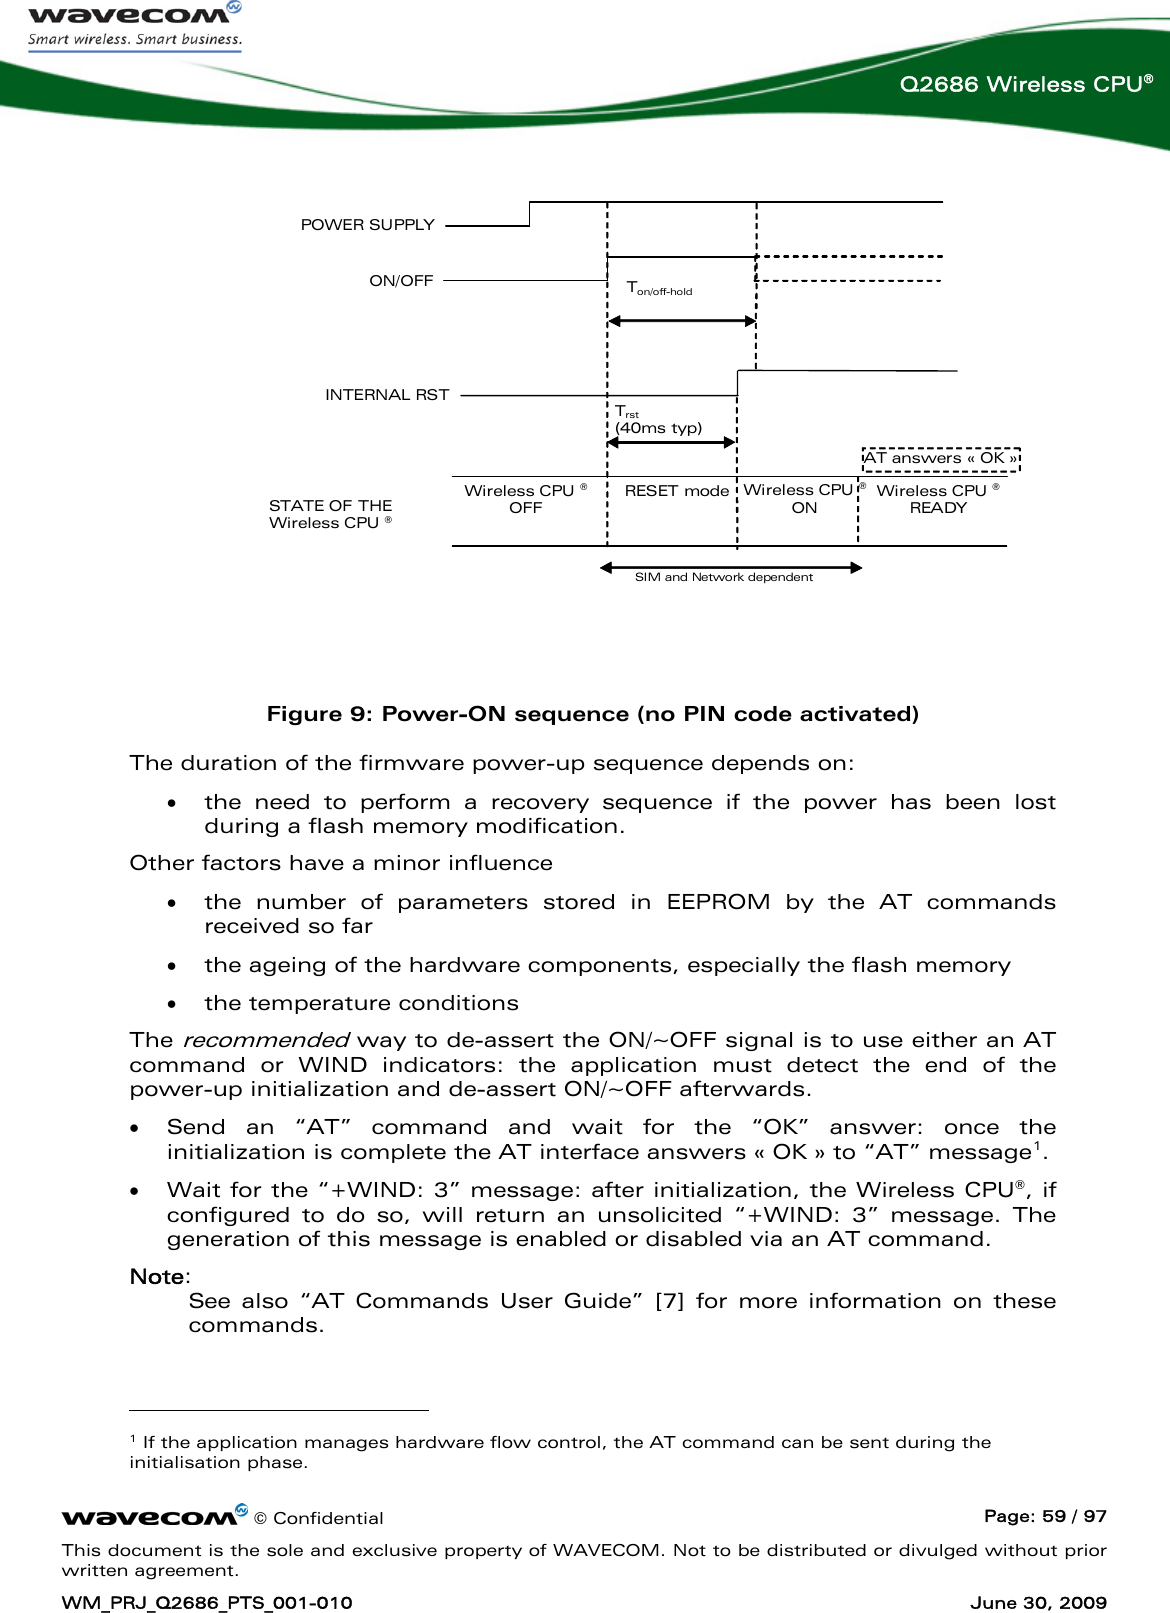      © Confidential  Page: 59 / 97 This document is the sole and exclusive property of WAVECOM. Not to be distributed or divulged without prior written agreement. WM_PRJ_Q2686_PTS_001-010  June 30, 2009  Q2686 Wireless CPU®  POWER SUPPLY  ON/OFF STATE OF THE Wireless CPU ® Wireless CPU ® OFF IBB+RF &lt; 22μA AT answers « OK » Wireless CPU ® READY Ton/off-hold  (2000ms min) SIM and Network dependent RESET mode IBB+RF=20 to 40mAINTERNAL RST Trst  (40ms typ) Wireless CPU ® ON IBB+RF&lt;120mA   IBB+RF = overall current consumption (Base Band + RF part)  Figure 9: Power-ON sequence (no PIN code activated) The duration of the firmware power-up sequence depends on: • the need to perform a recovery sequence if the power has been lost during a flash memory modification. Other factors have a minor influence • the number of parameters stored in EEPROM by the AT commands received so far • the ageing of the hardware components, especially the flash memory • the temperature conditions The recommended way to de-assert the ON/~OFF signal is to use either an AT command or WIND indicators: the application must detect the end of the power-up initialization and de-assert ON/~OFF afterwards. • Send an “AT” command and wait for the “OK” answer: once the initialization is complete the AT interface answers « OK » to “AT” message1.  • Wait for the “+WIND: 3” message: after initialization, the Wireless CPU®, if configured to do so, will return an unsolicited “+WIND: 3” message. The generation of this message is enabled or disabled via an AT command. Note: See also “AT Commands User Guide” [7] for more information on these commands.                                          1 If the application manages hardware flow control, the AT command can be sent during the initialisation phase. 